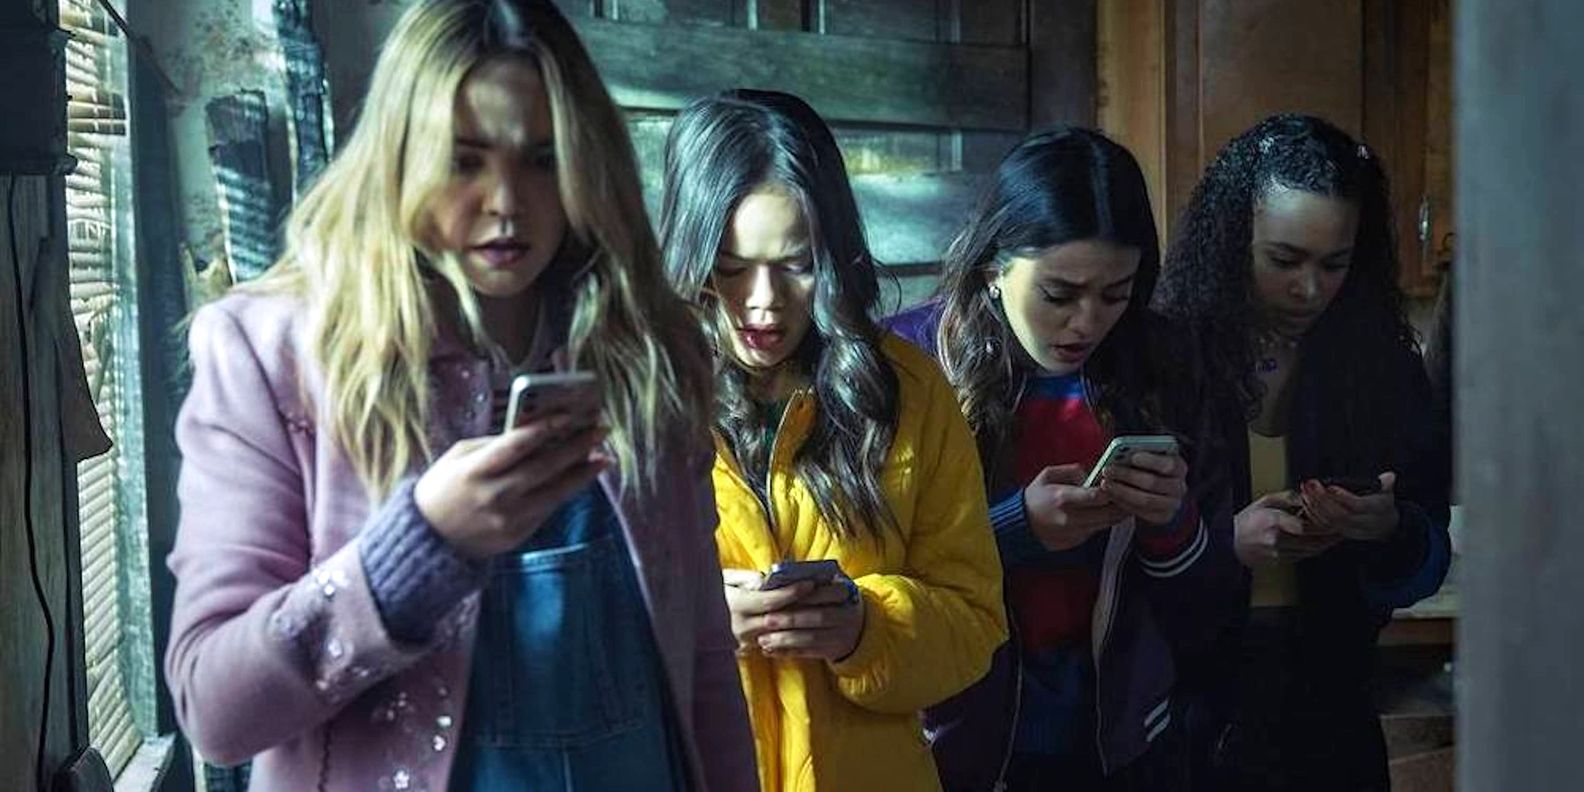 The cast of Pretty Little Liars: Original Sin characters looking at their phones with a terrified expression.